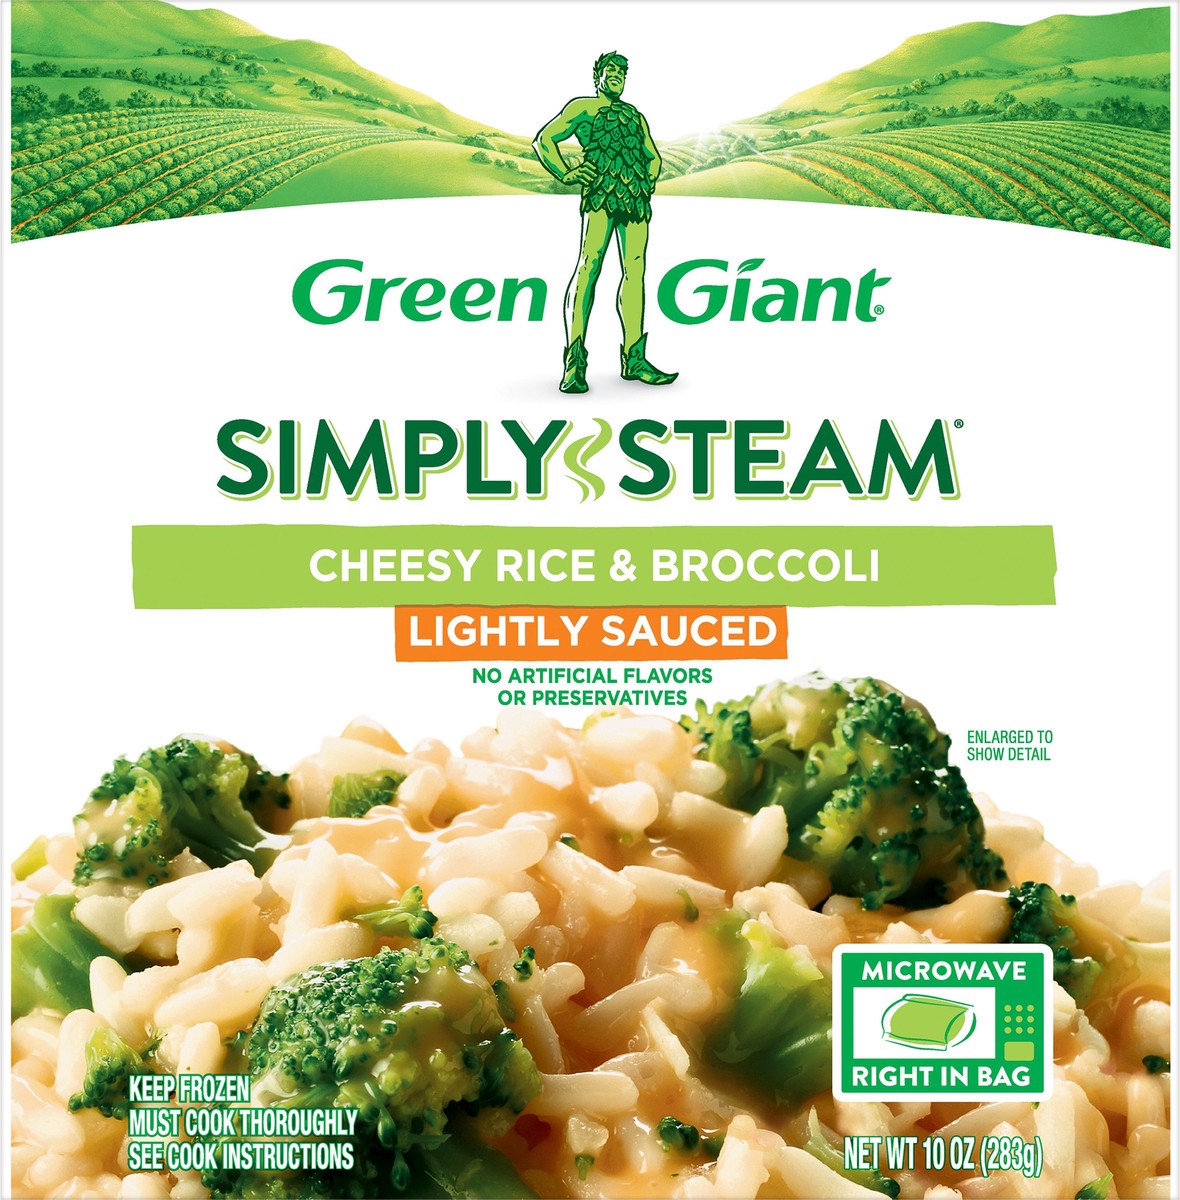 slide 4 of 4, Green Giant Simply Steam™ Lightly Sauced Cheesy Rice & Broccoli 10 oz. Bag, 